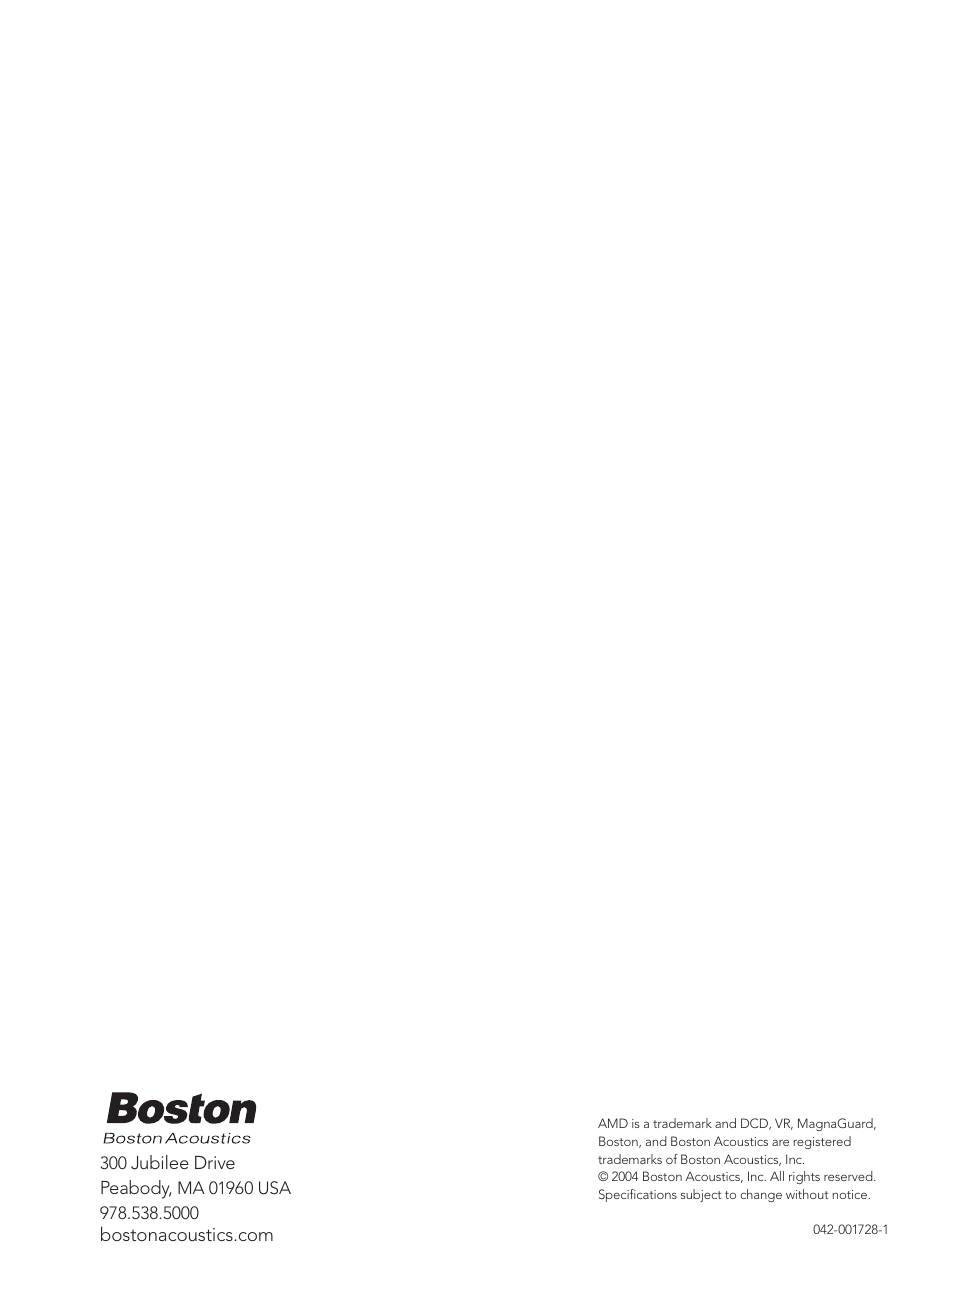 Boston Acoustics VRC User Manual | Page 8 / 8 | Also for: VRB, VR1, VR 2